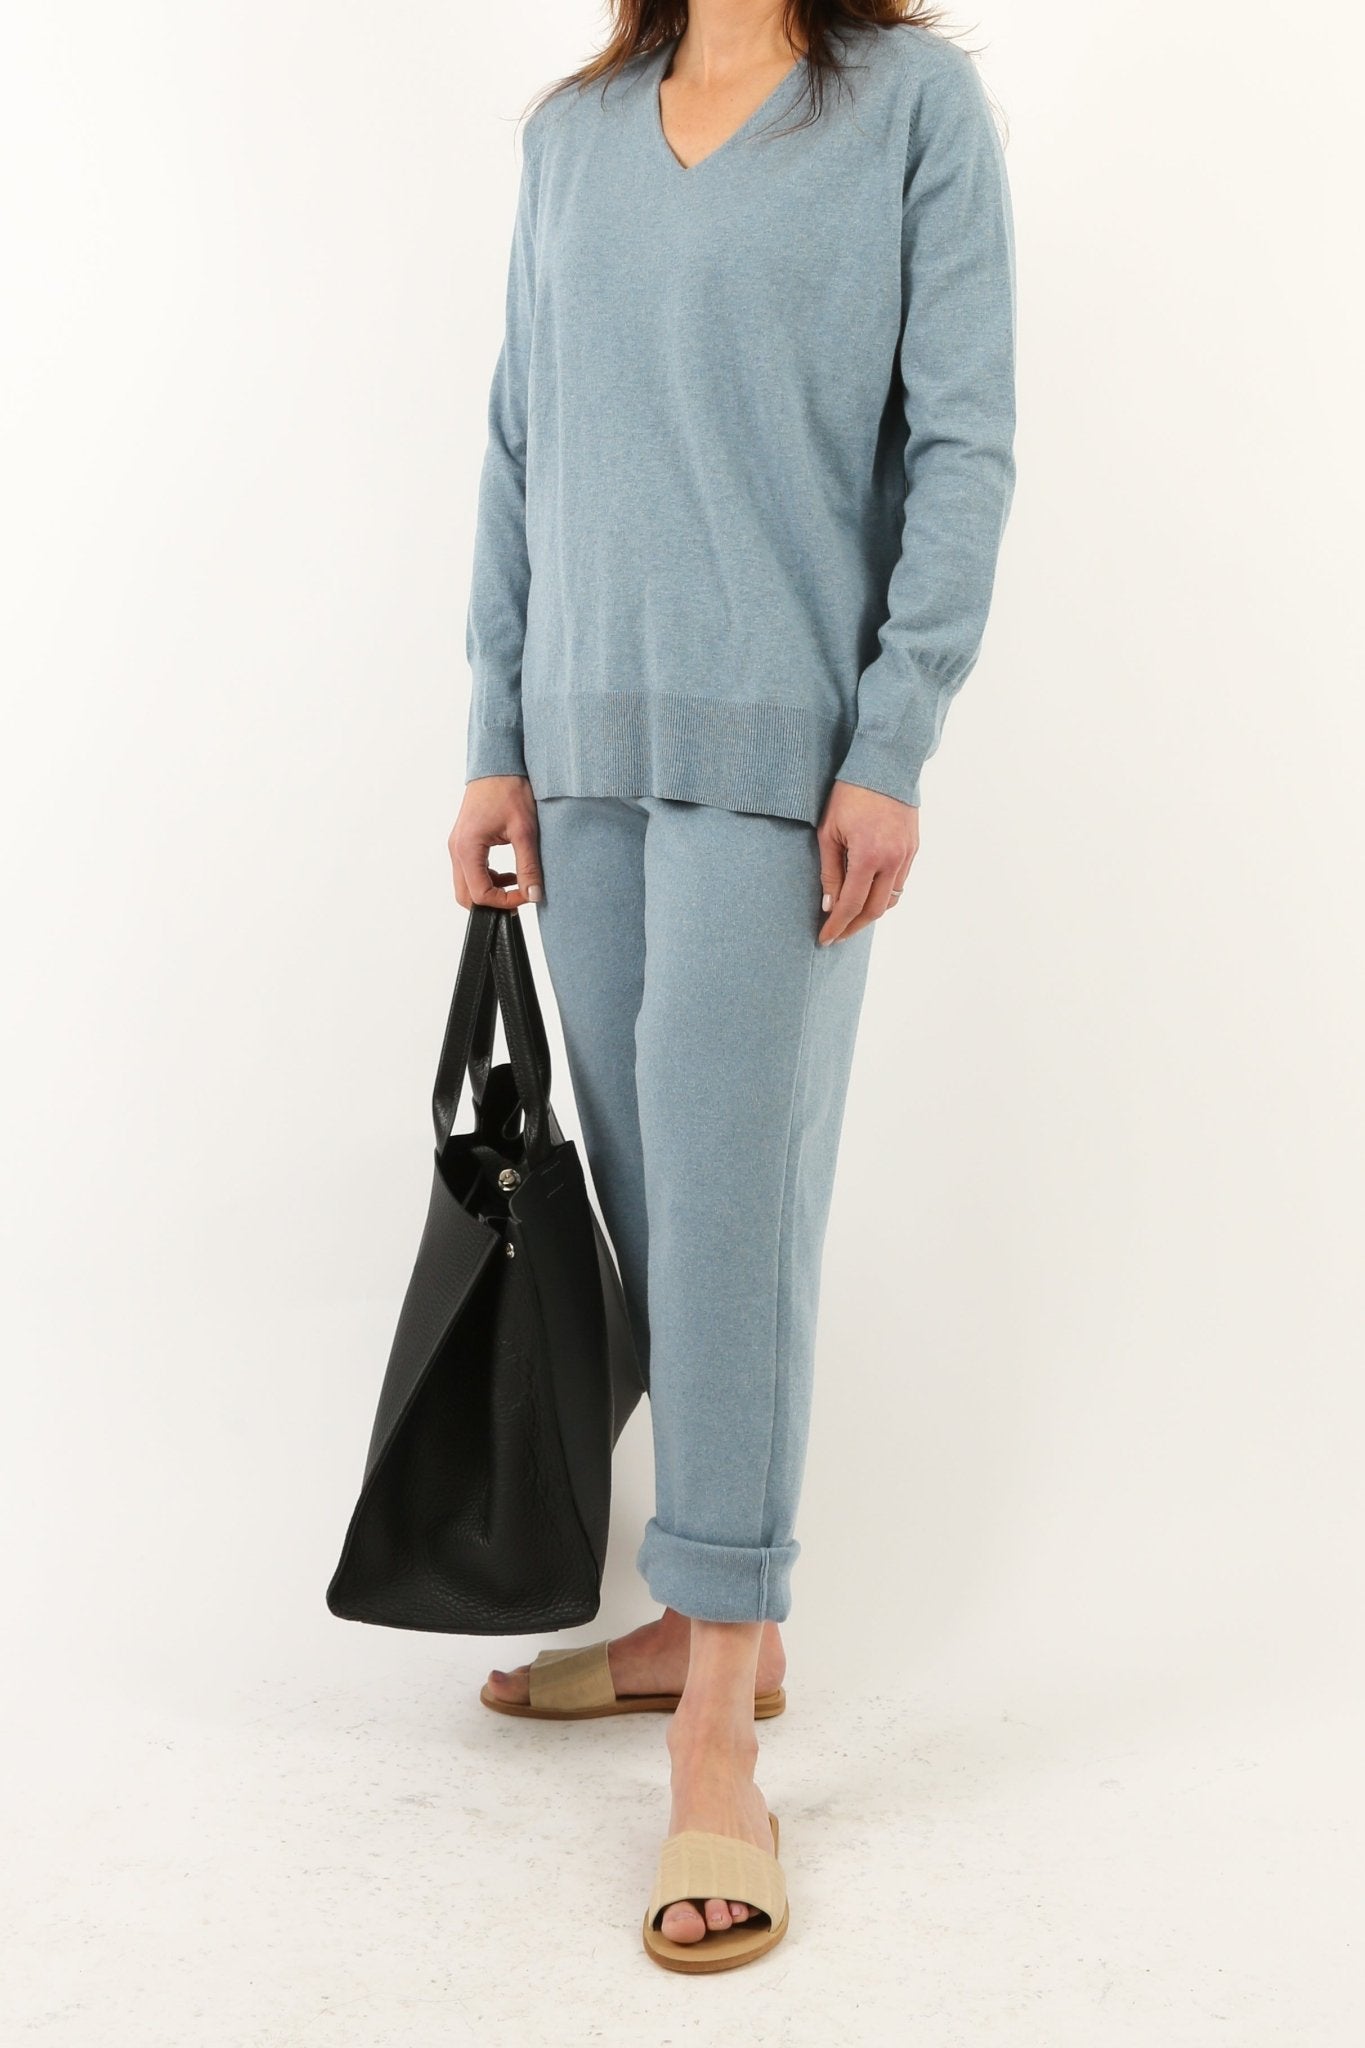 PAIGE PANT IN DOUBLE KNIT HEATHERED PIMA COTTON IN HEATHER MARINE BLUE - Jarbo